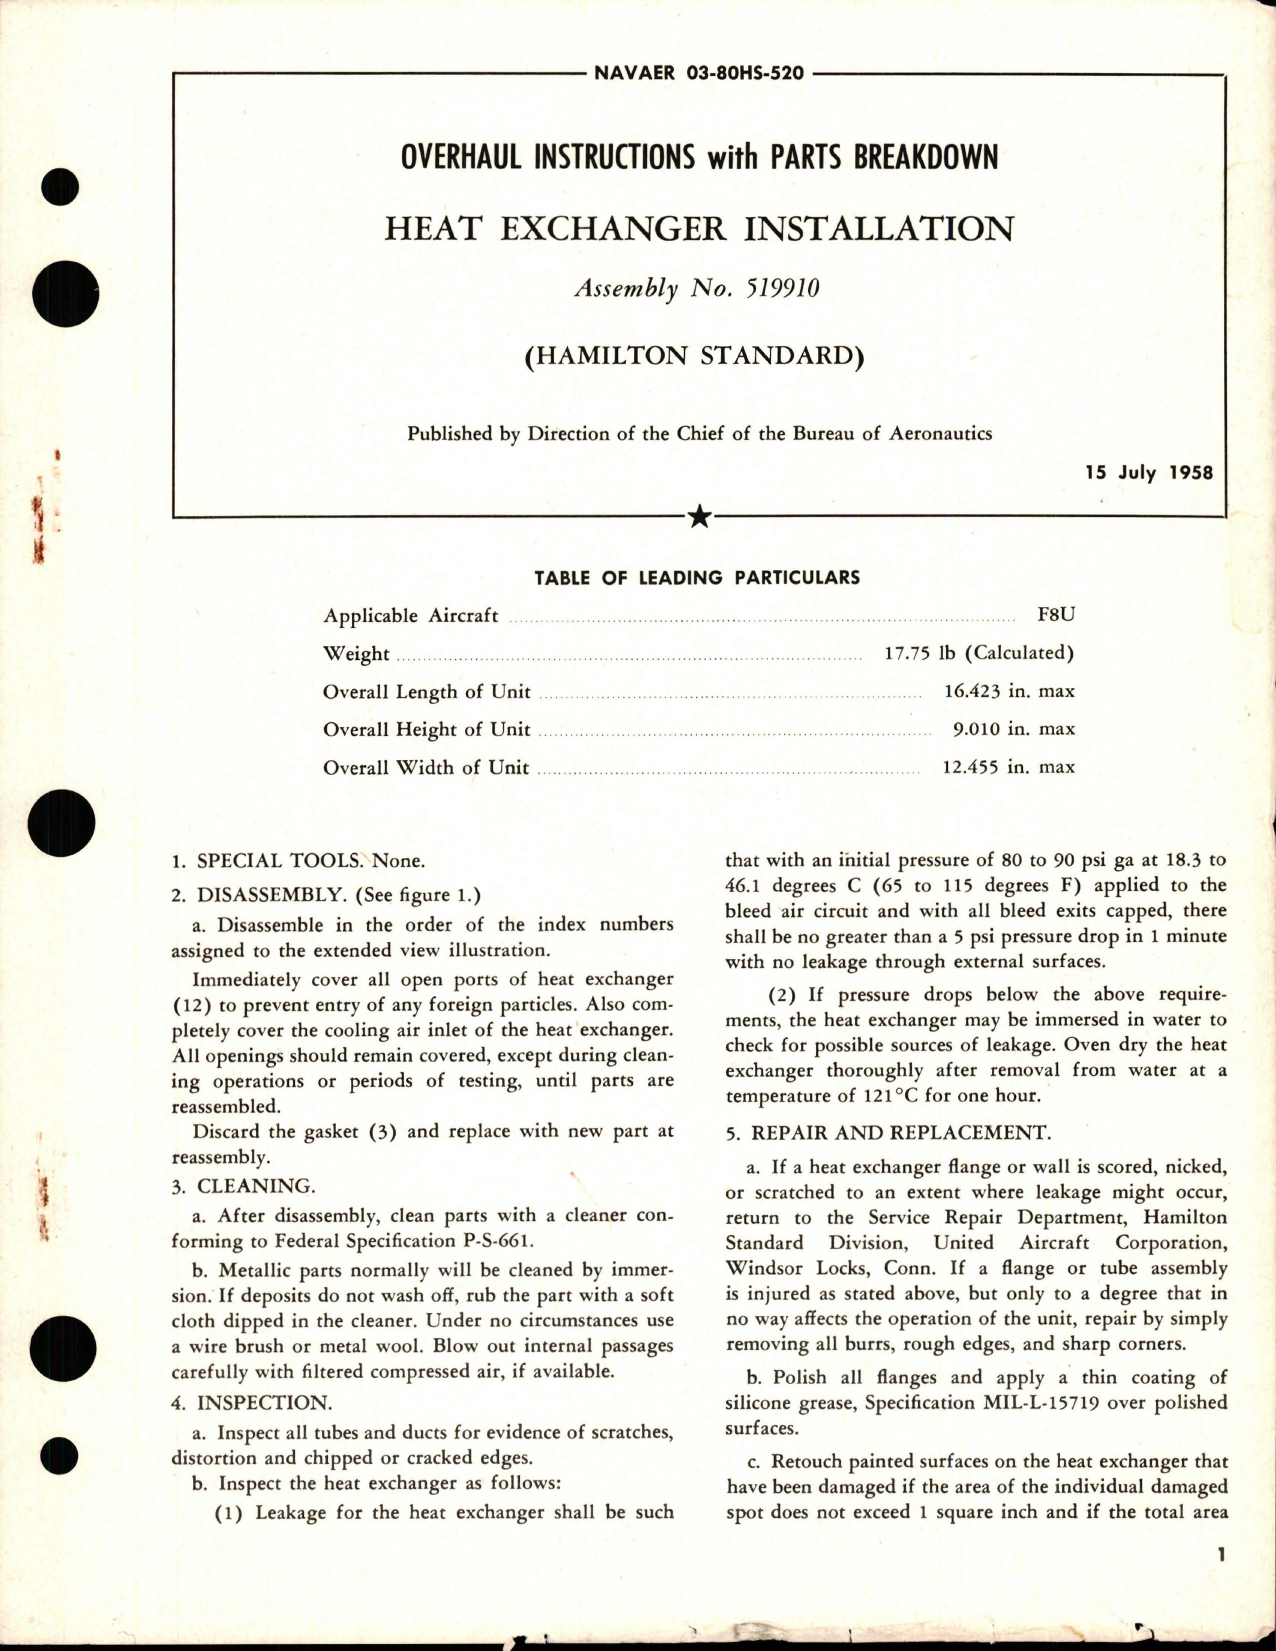 Sample page 1 from AirCorps Library document: Overhaul Instructions with Parts Breakdown for Heat Exchanger Installation - Assembly 519910 